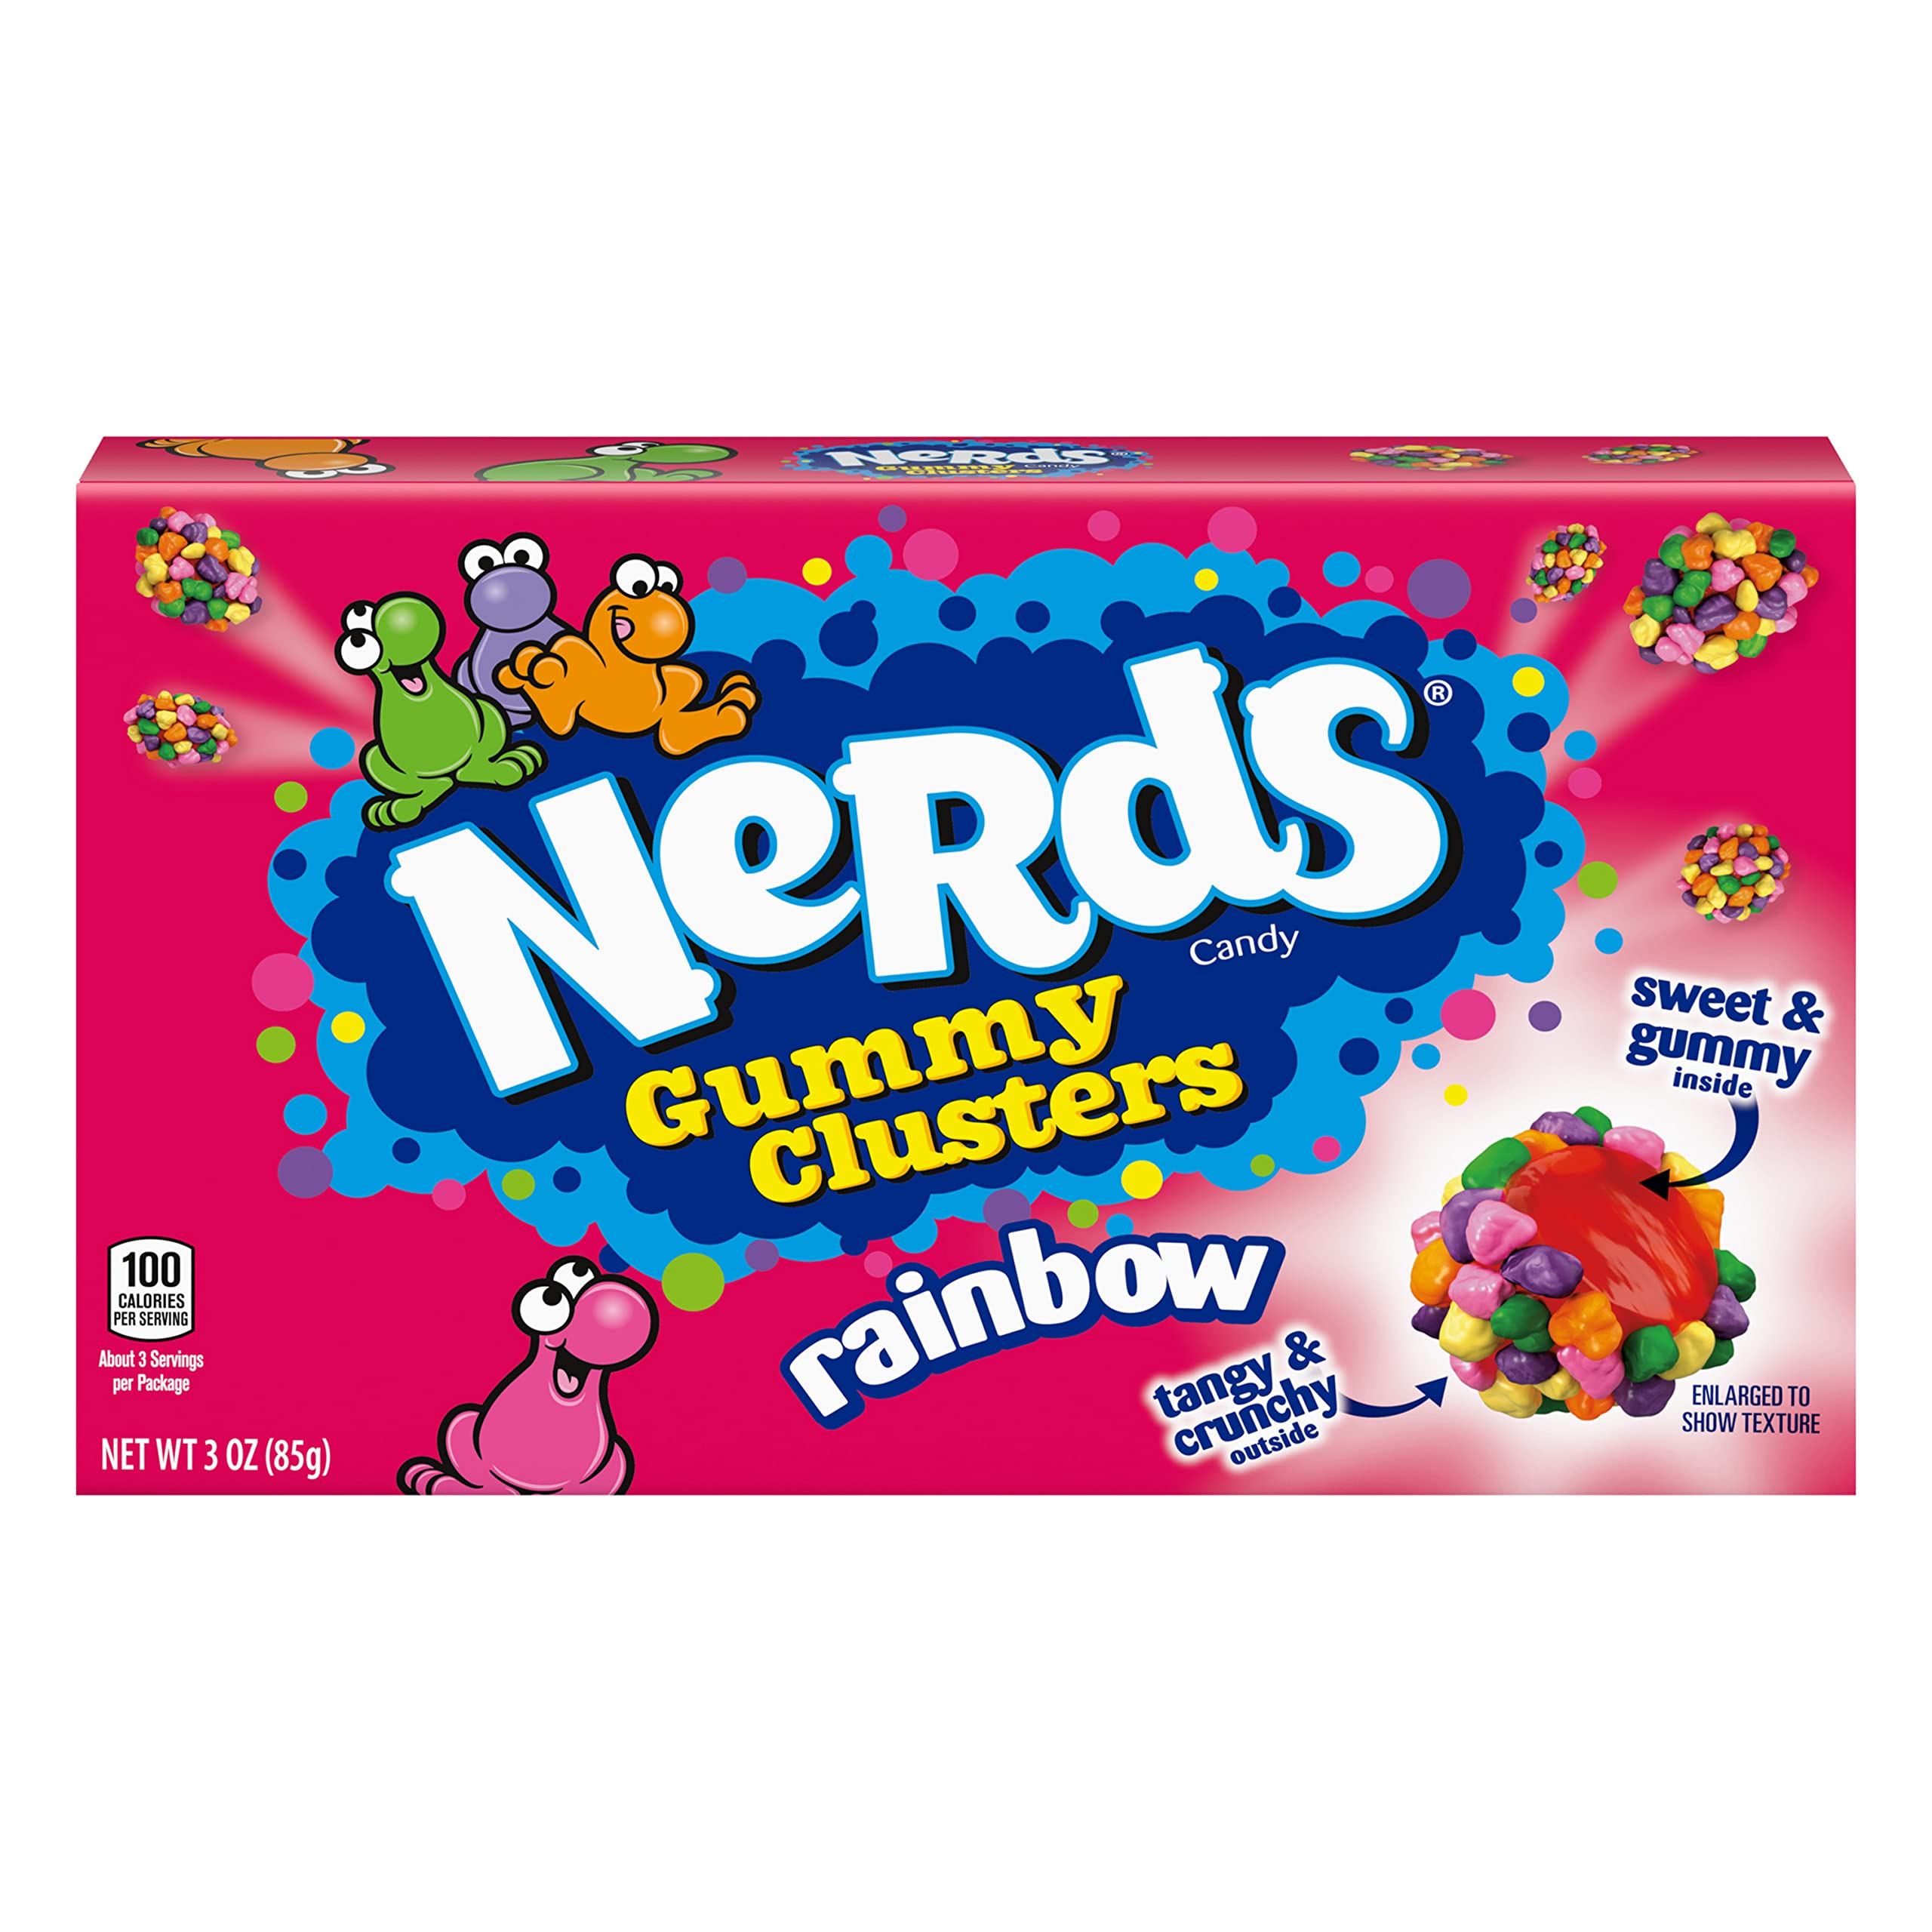 12-Packs 3-Oz Nerds Gummy Clusters Movie Theater Candy Boxes (Rainbow) $11.90 ($0.99 each) + Free Shipping w/ Prime or on $35+